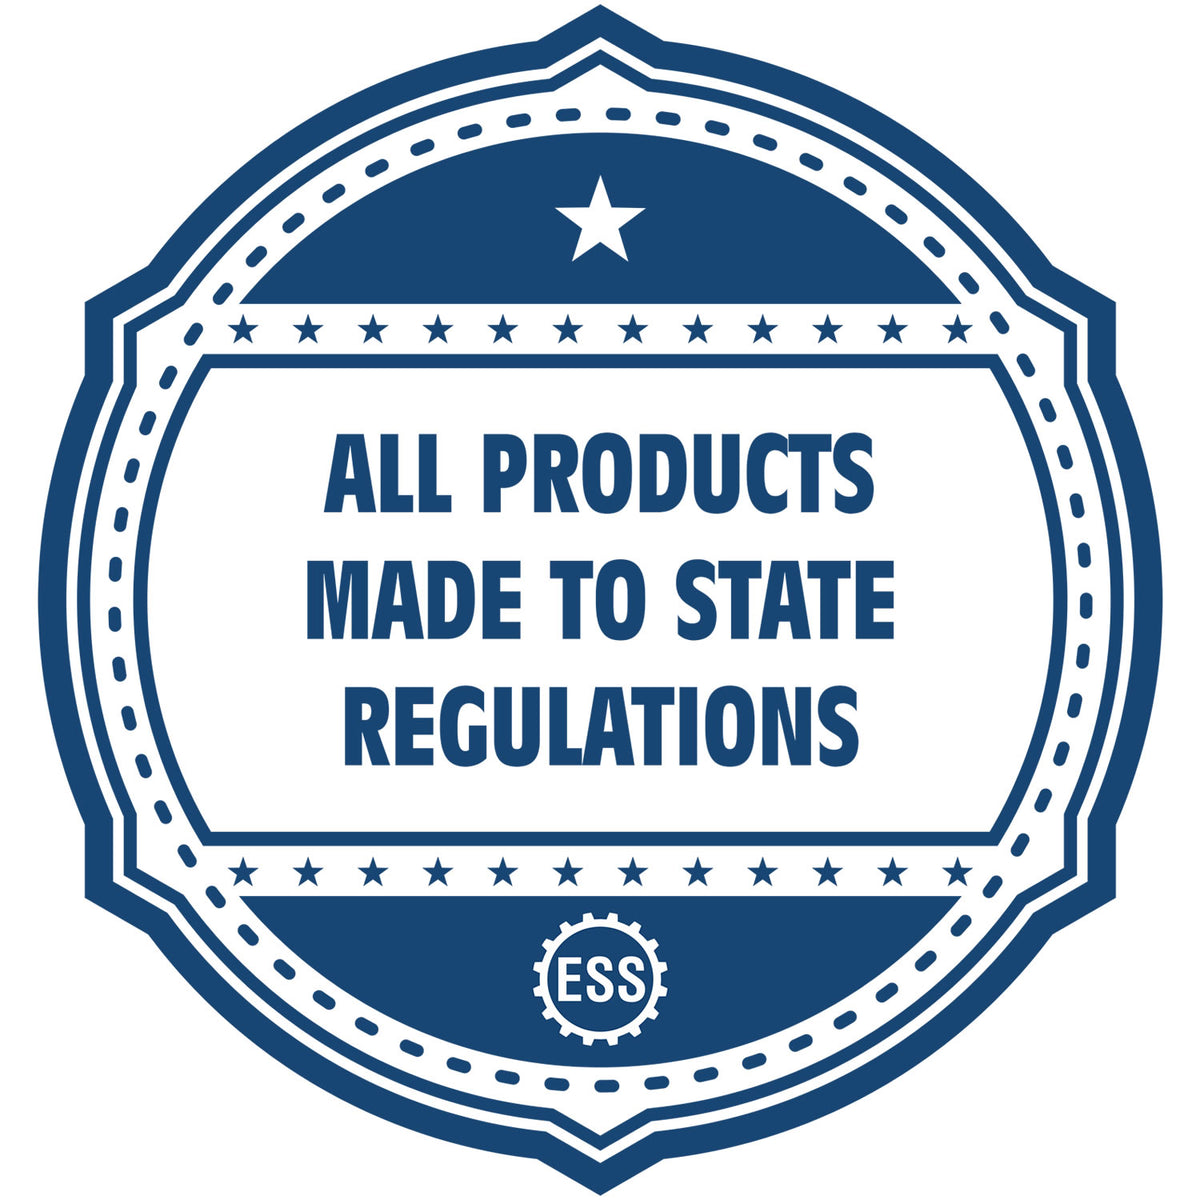 A blue icon or badge for the Gift Montana Engineer Seal showing that this product is made in compliance with state regulations.